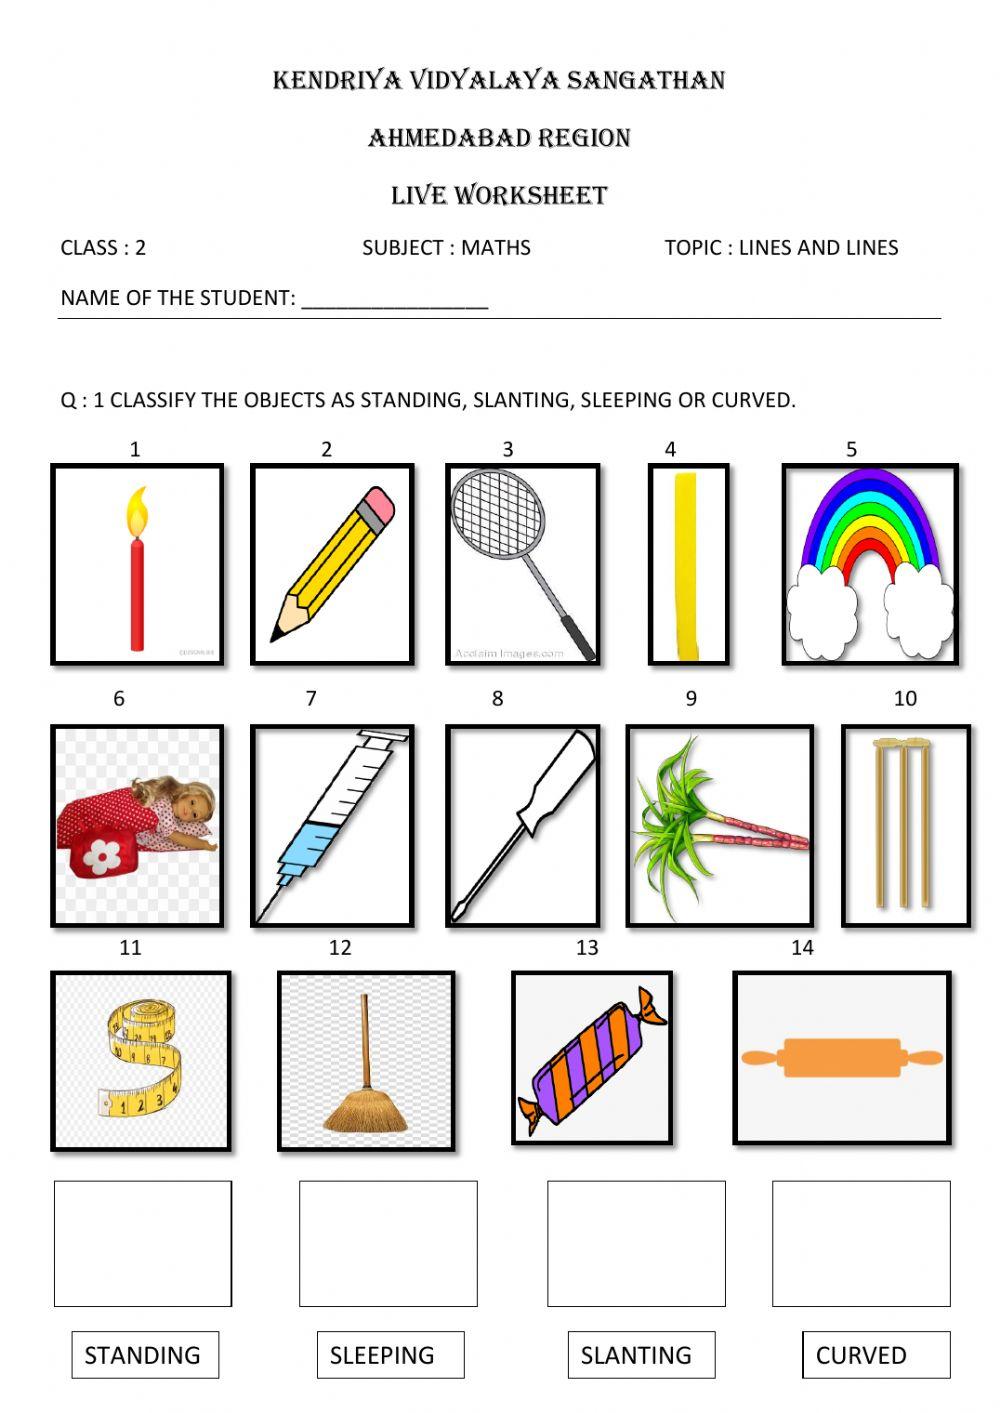 Class 2 maths -lines and lines